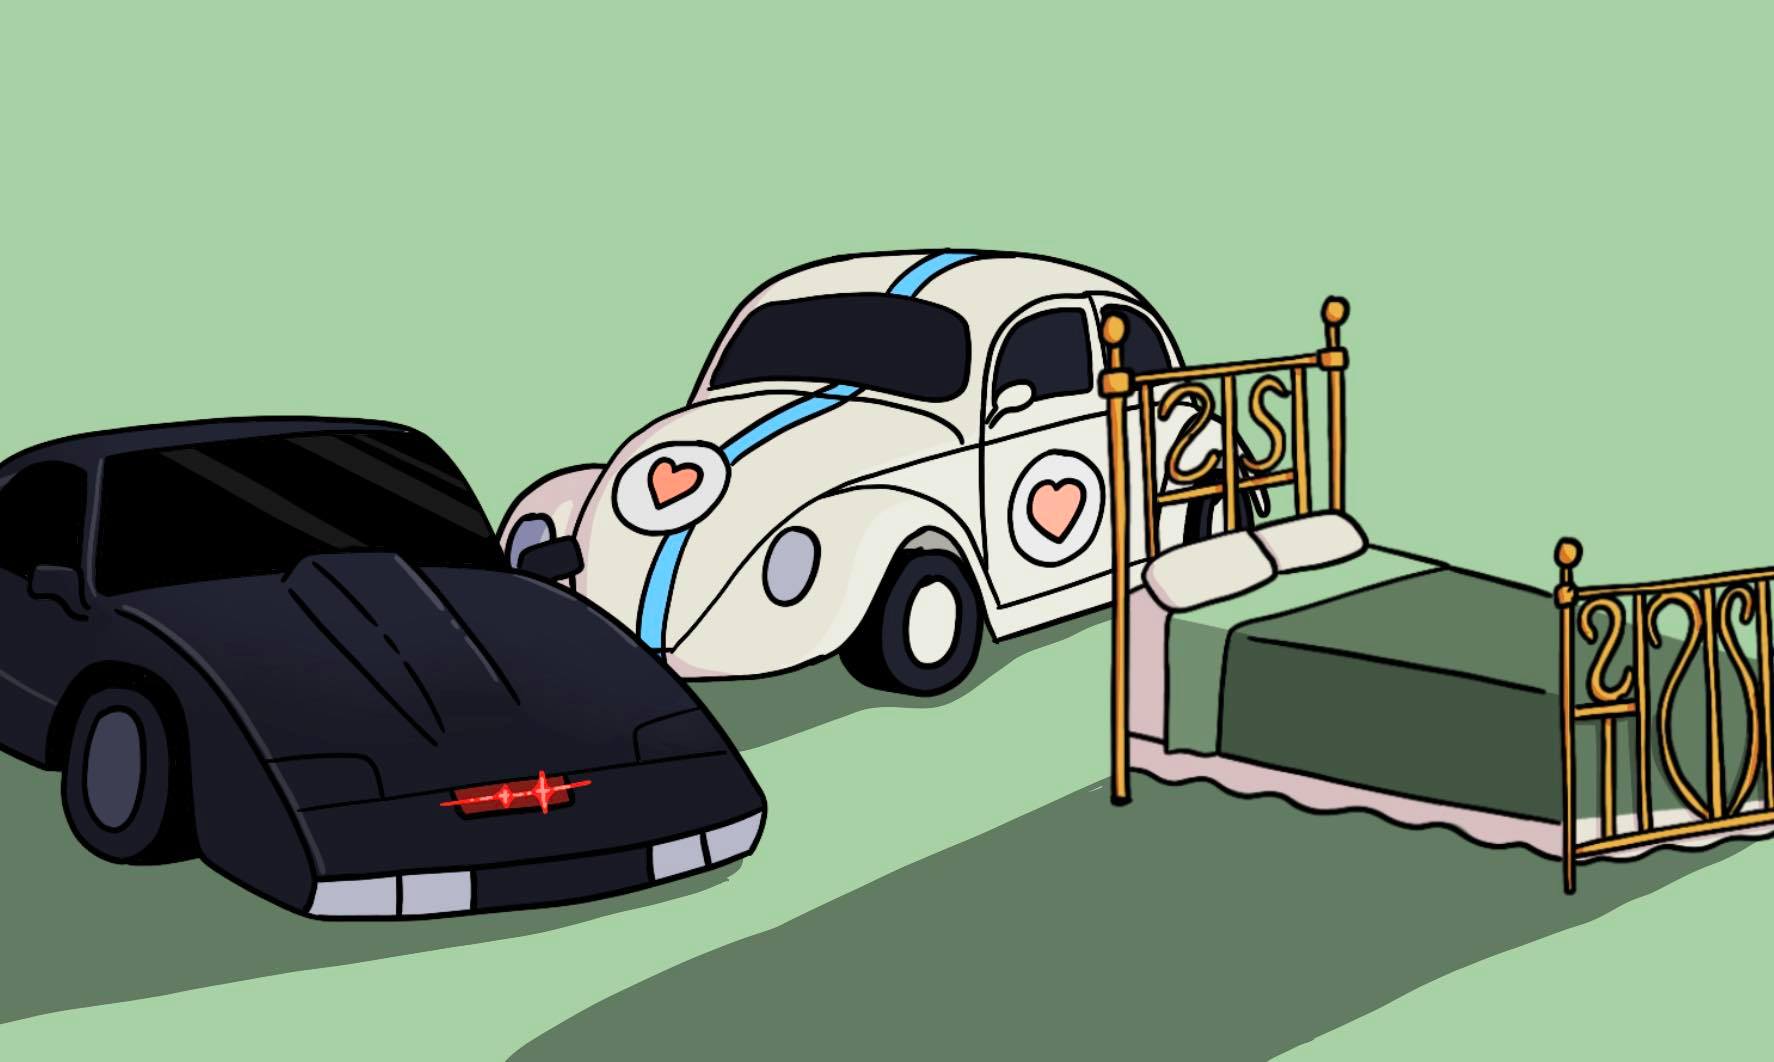 Knight rider, the Love Bug, and the bed from Bedknobs and Broomsticks